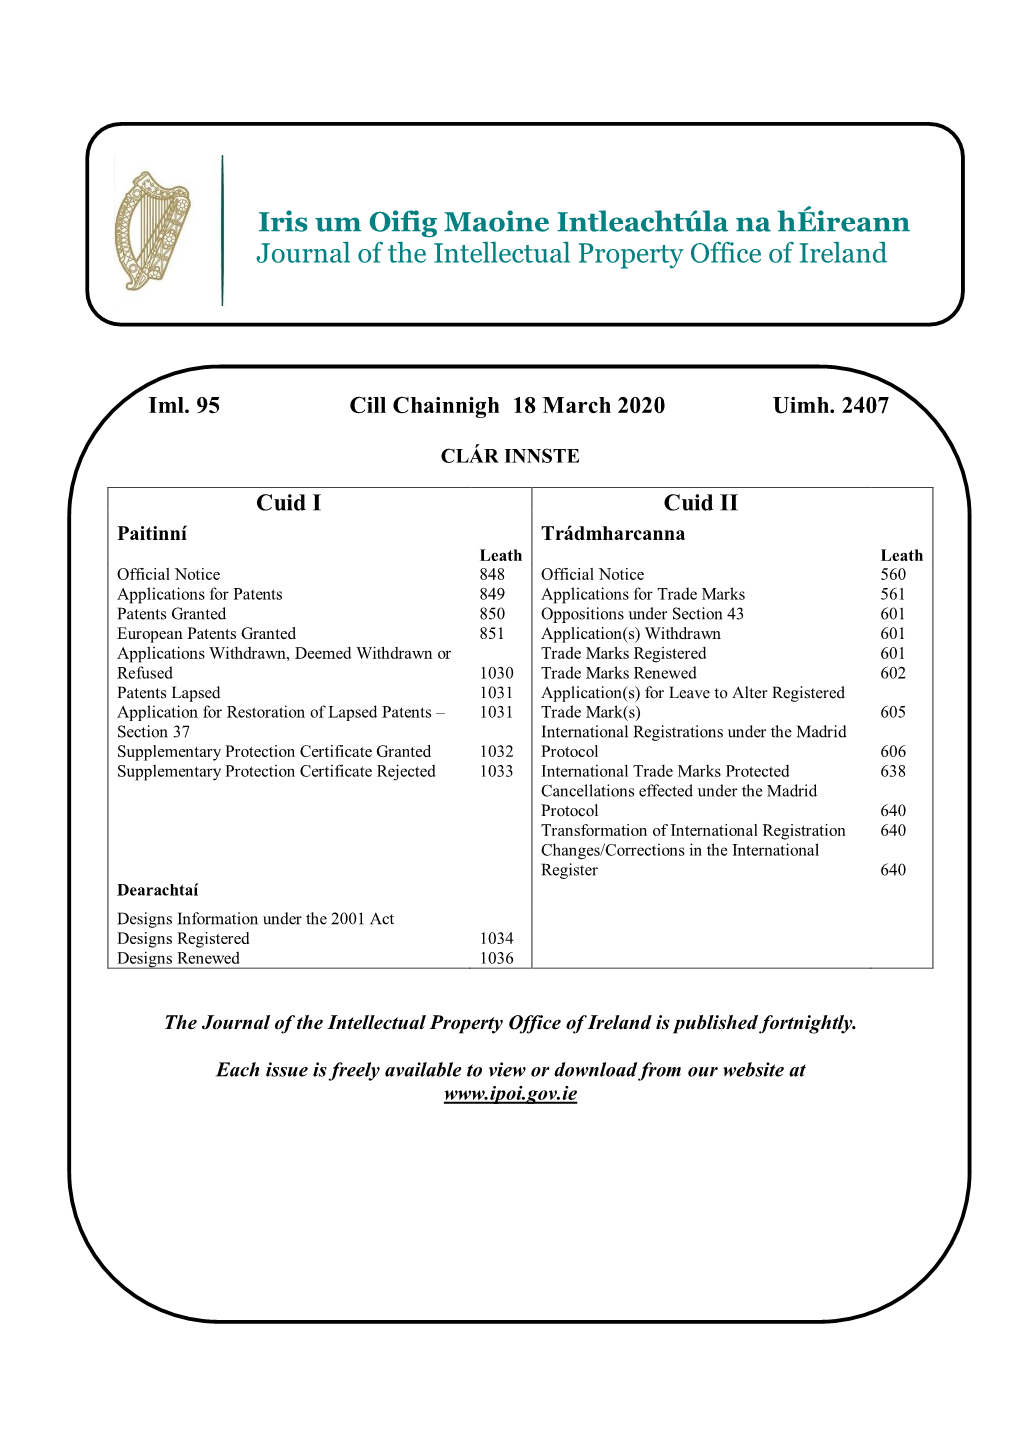 Journal of the Intellectual Property Office of Ireland